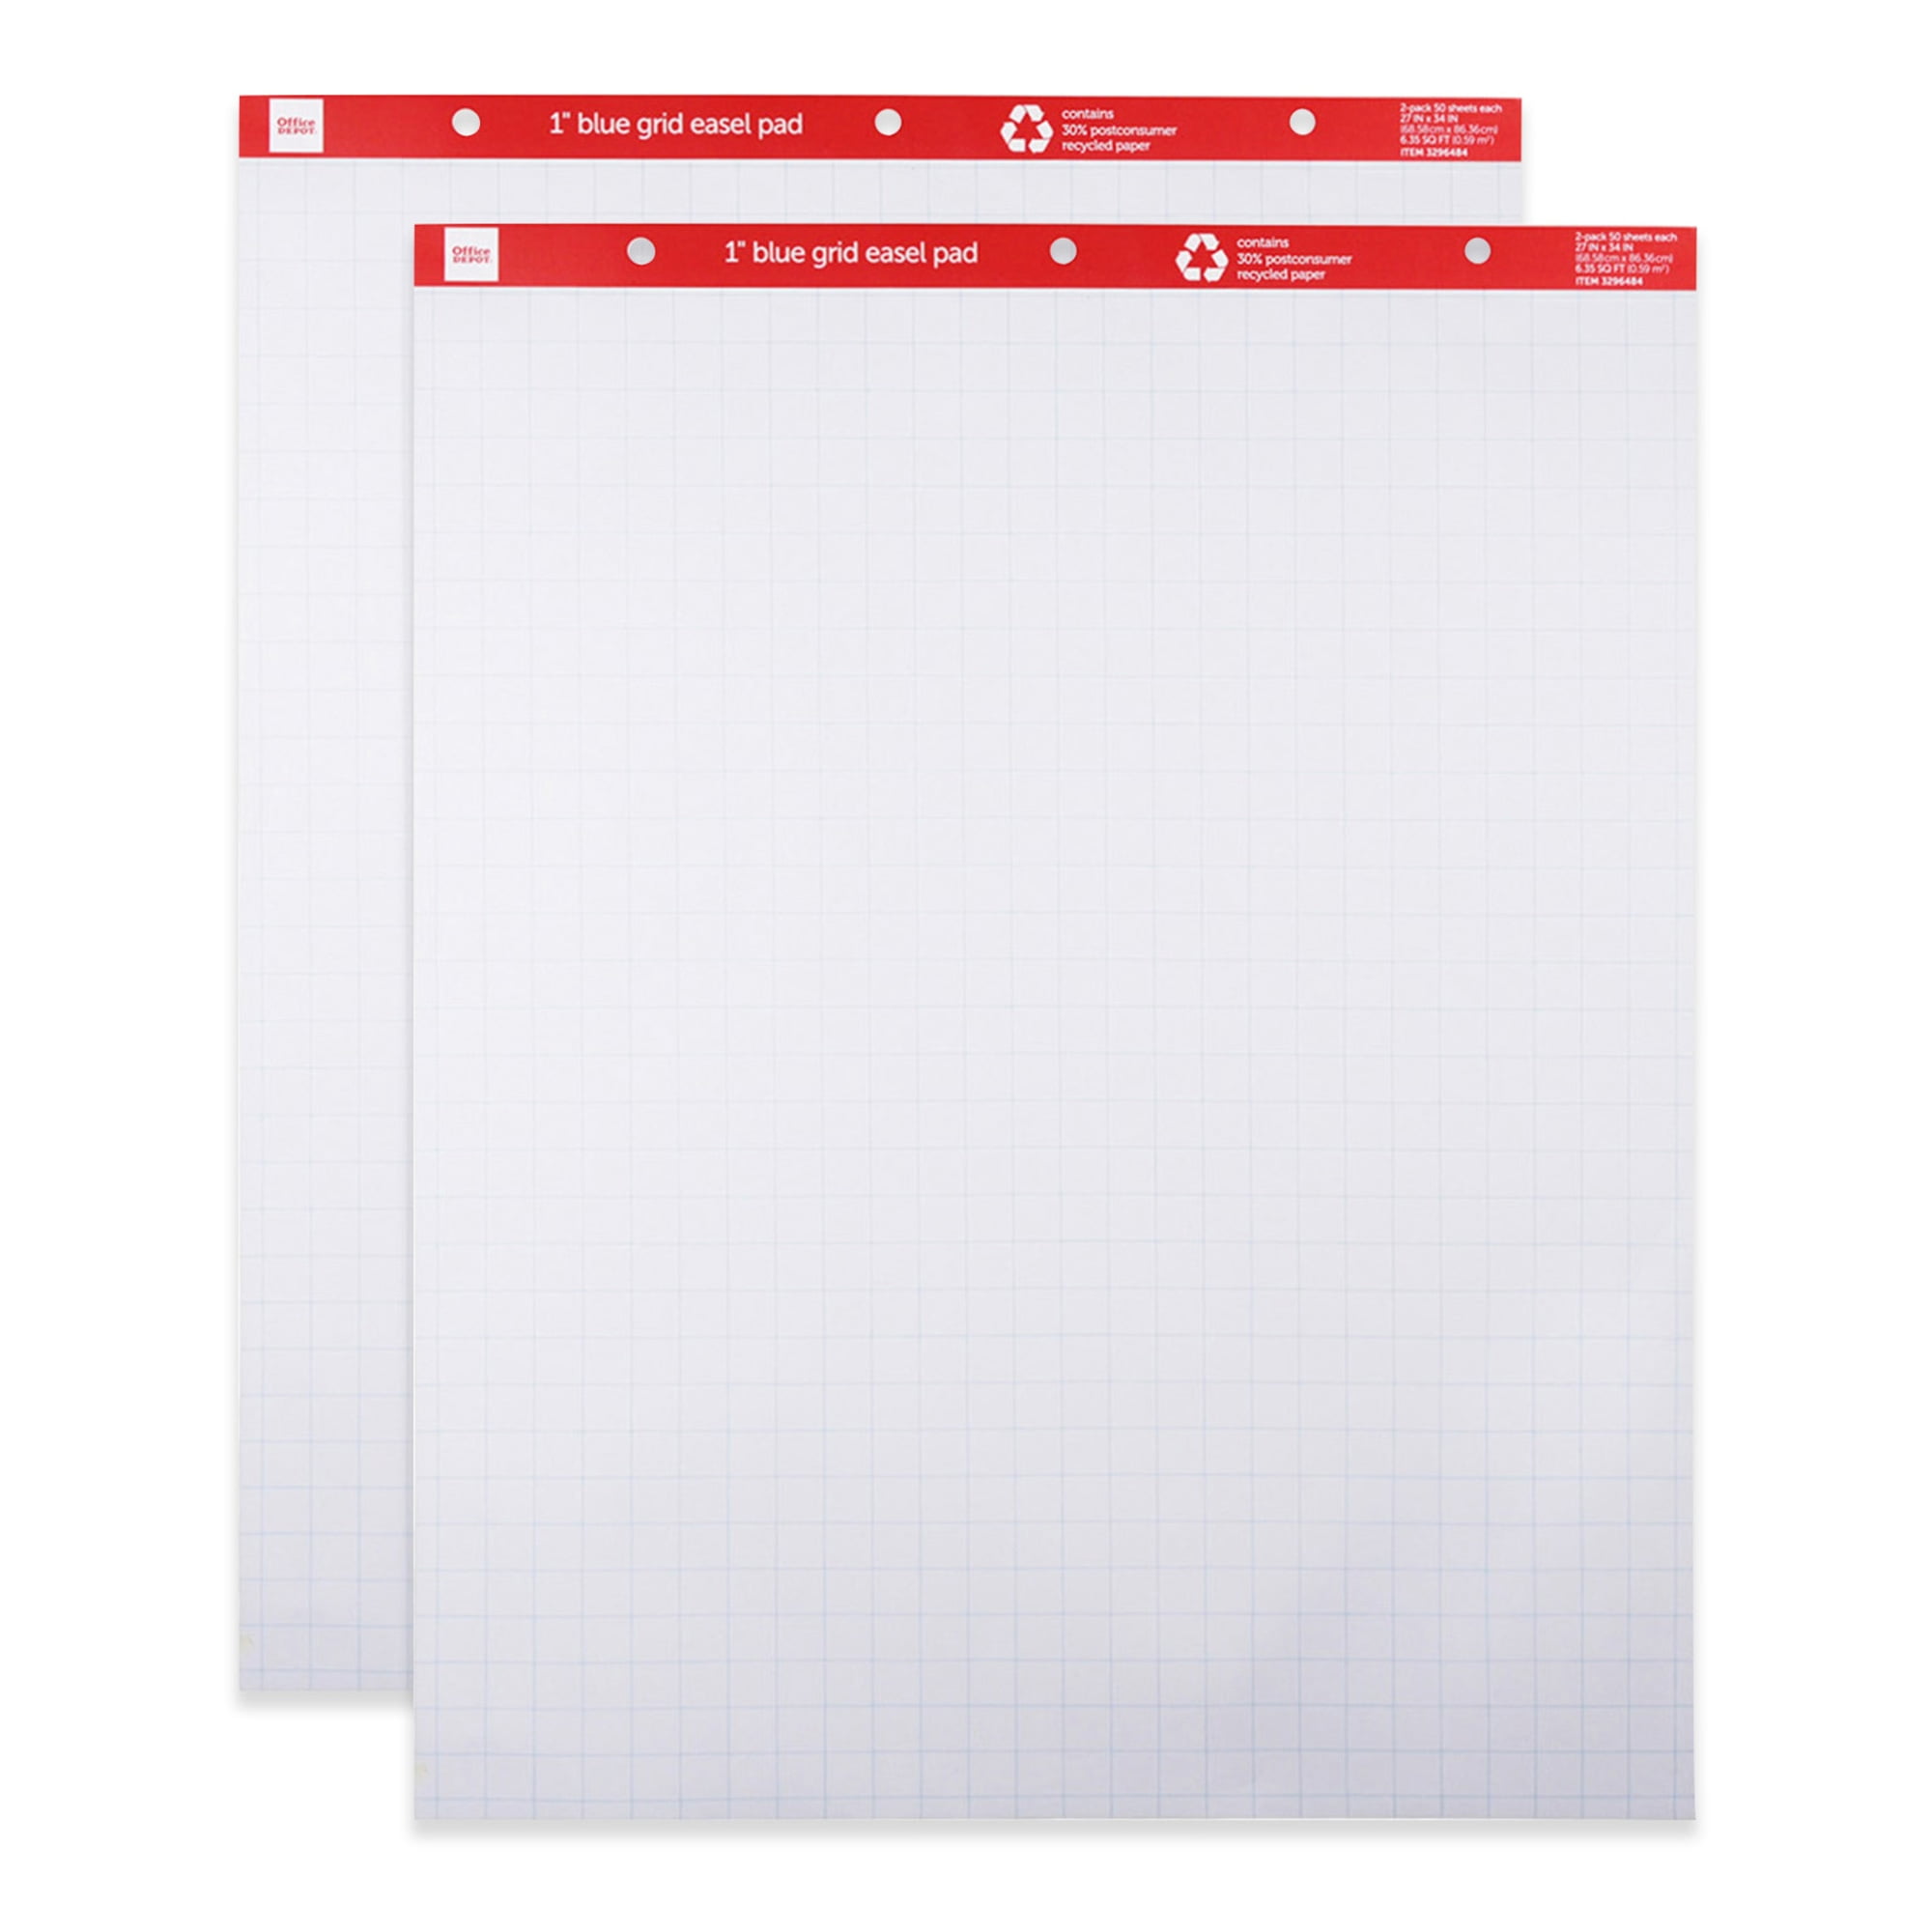  Easel Pad 23x32 - 3 Pack (75 Sheets) - Flip Chart Paper, 25  Sheets/Pack, Plain White, Poster Flipchart 100 gsm - Large Drawing Pad for  Teachers, Kids, Classroom, Office, Craft, Art, Presentation : Office  Products